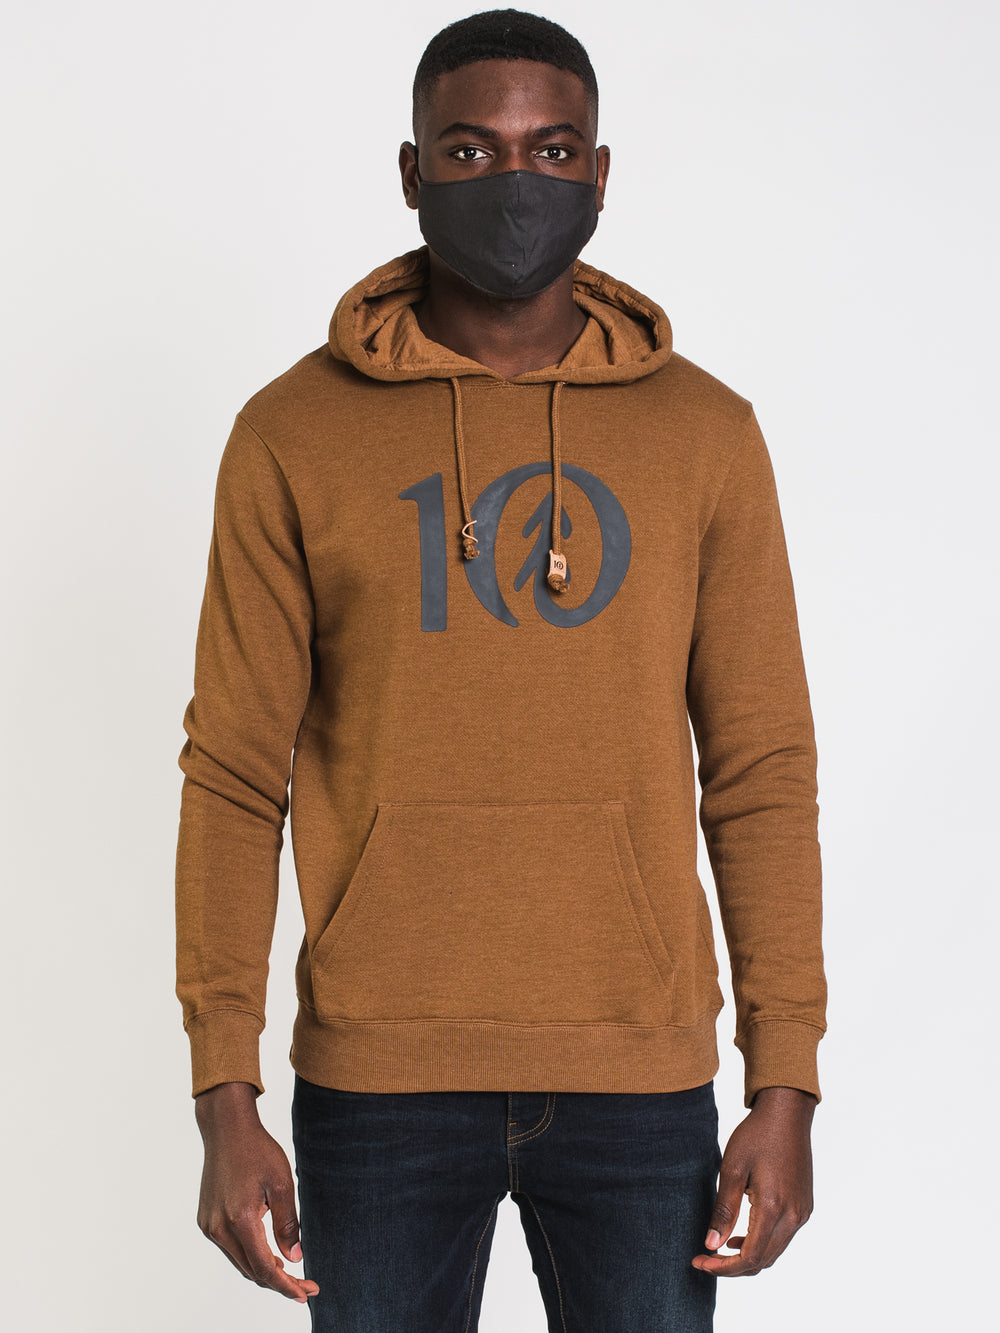 TENTREE RIASED RUBBER LARGE LOGO PULLOVER HOODIE - CLEARANCE